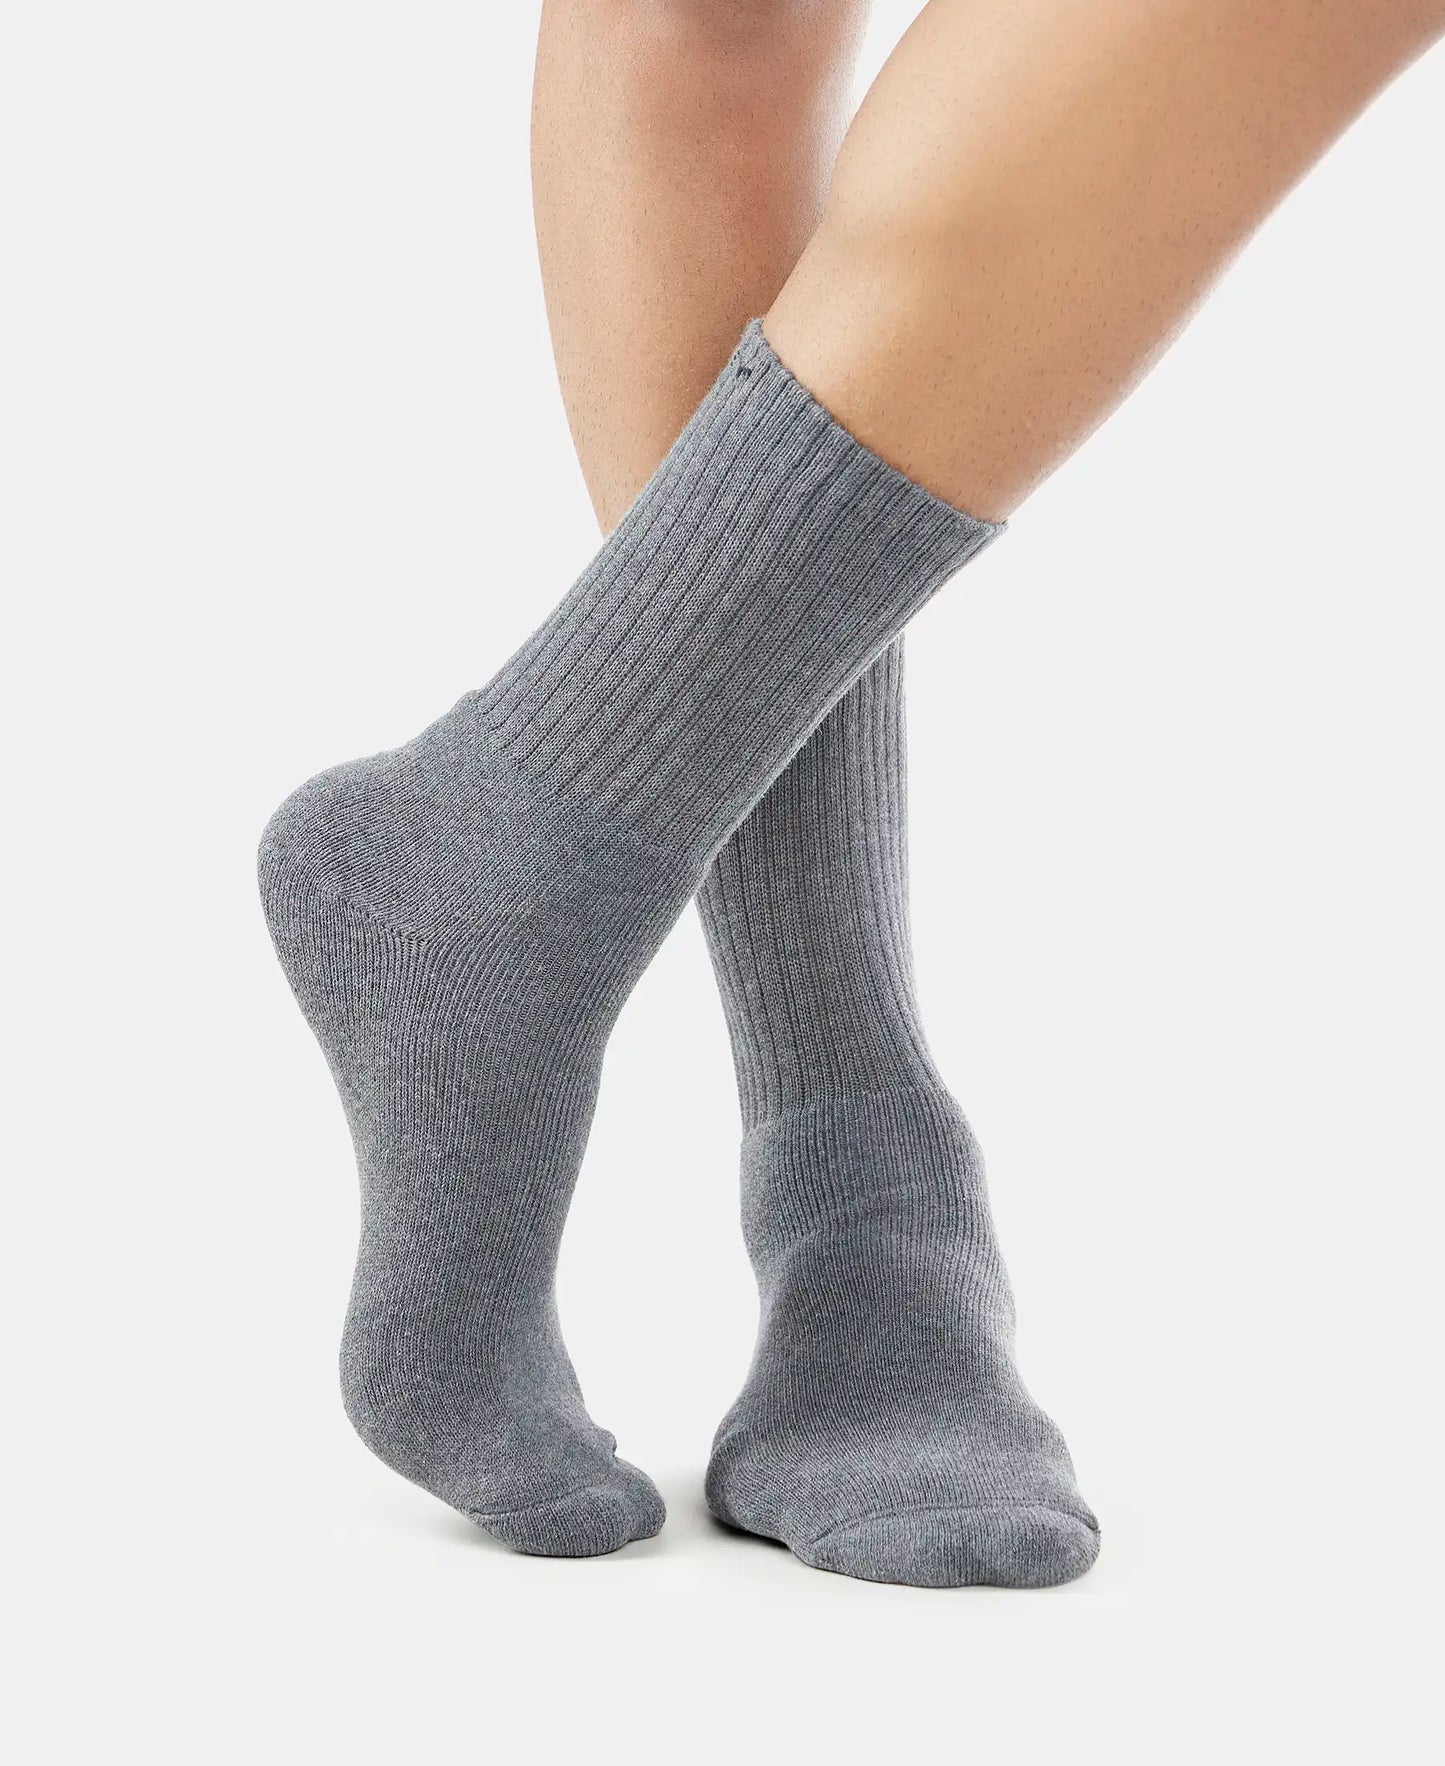 Compact Cotton Terry Crew Length Socks With StayFresh Treatment - Black/Midgrey Melange/Charcoal Melange (Pack of 3)